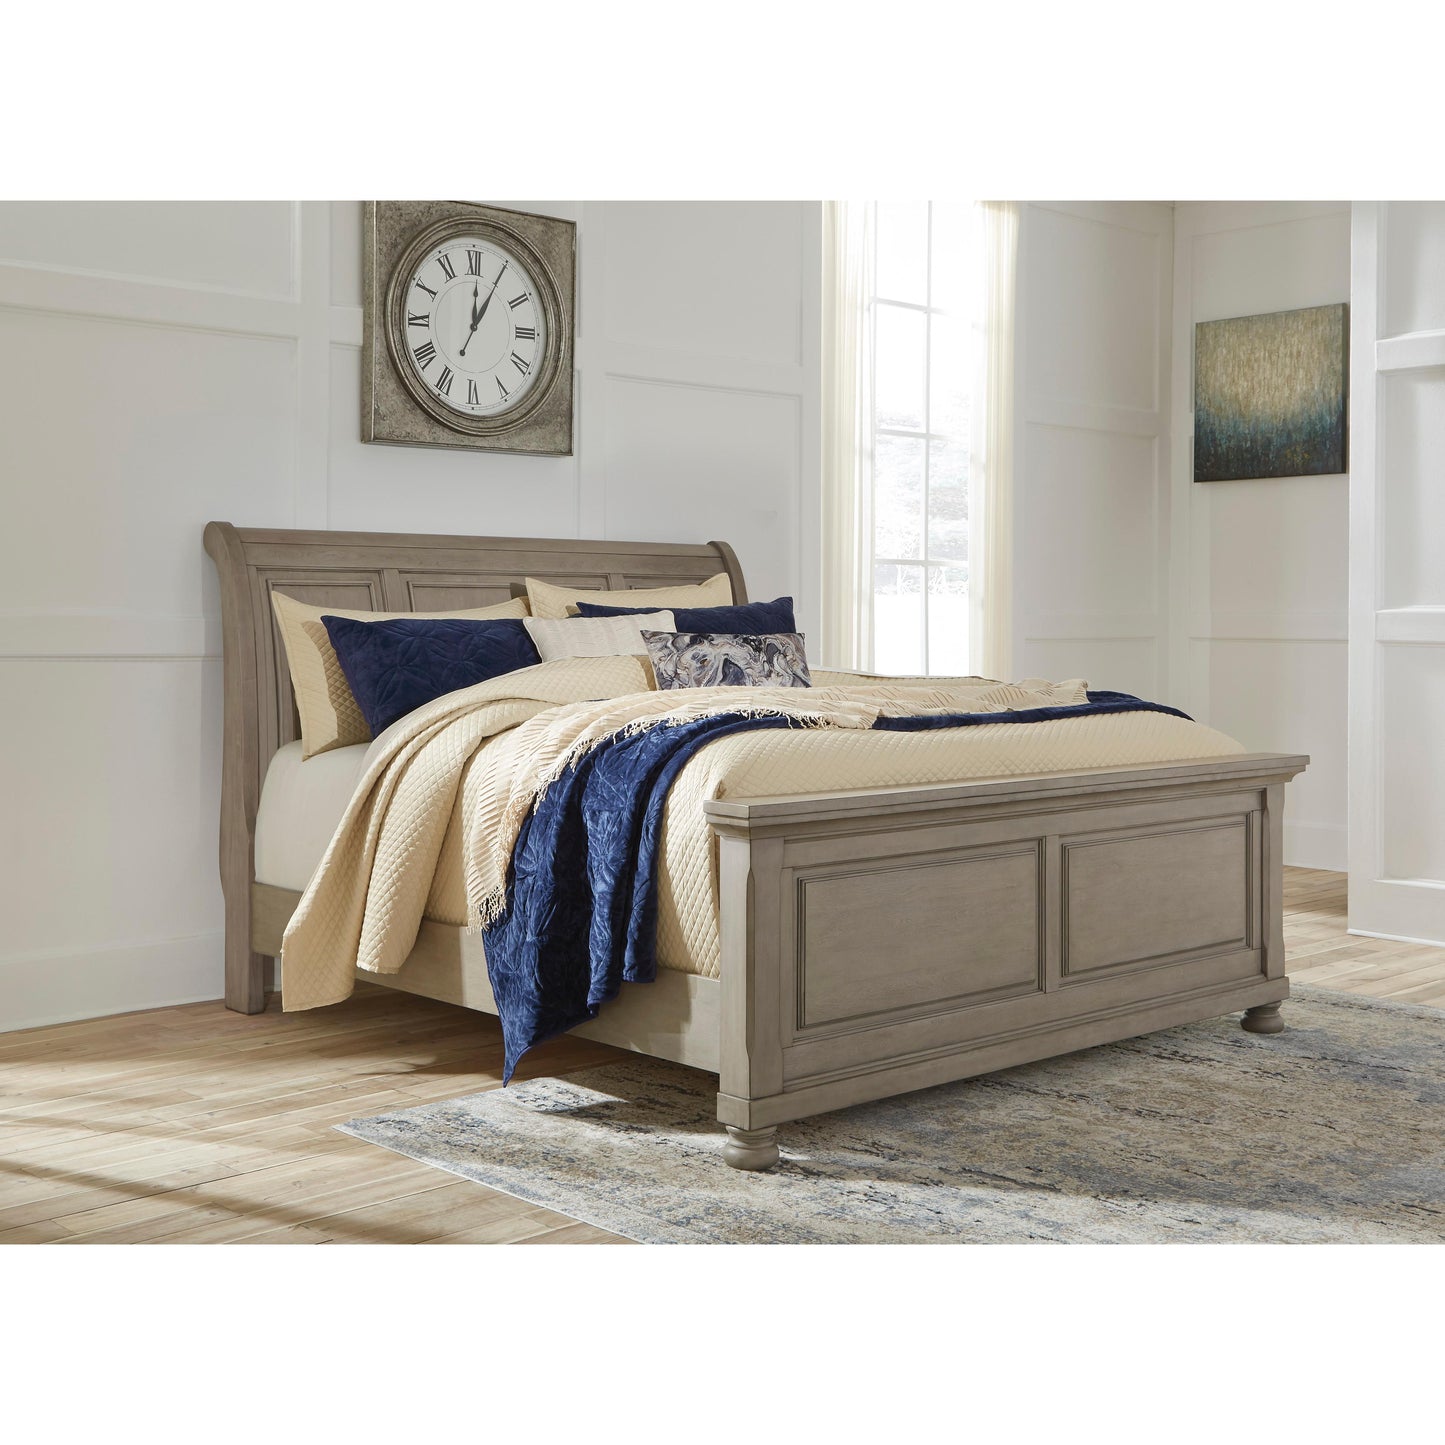 Signature Design by Ashley Lettner King Sleigh Bed B733-78/B733-56/B733-97 IMAGE 2